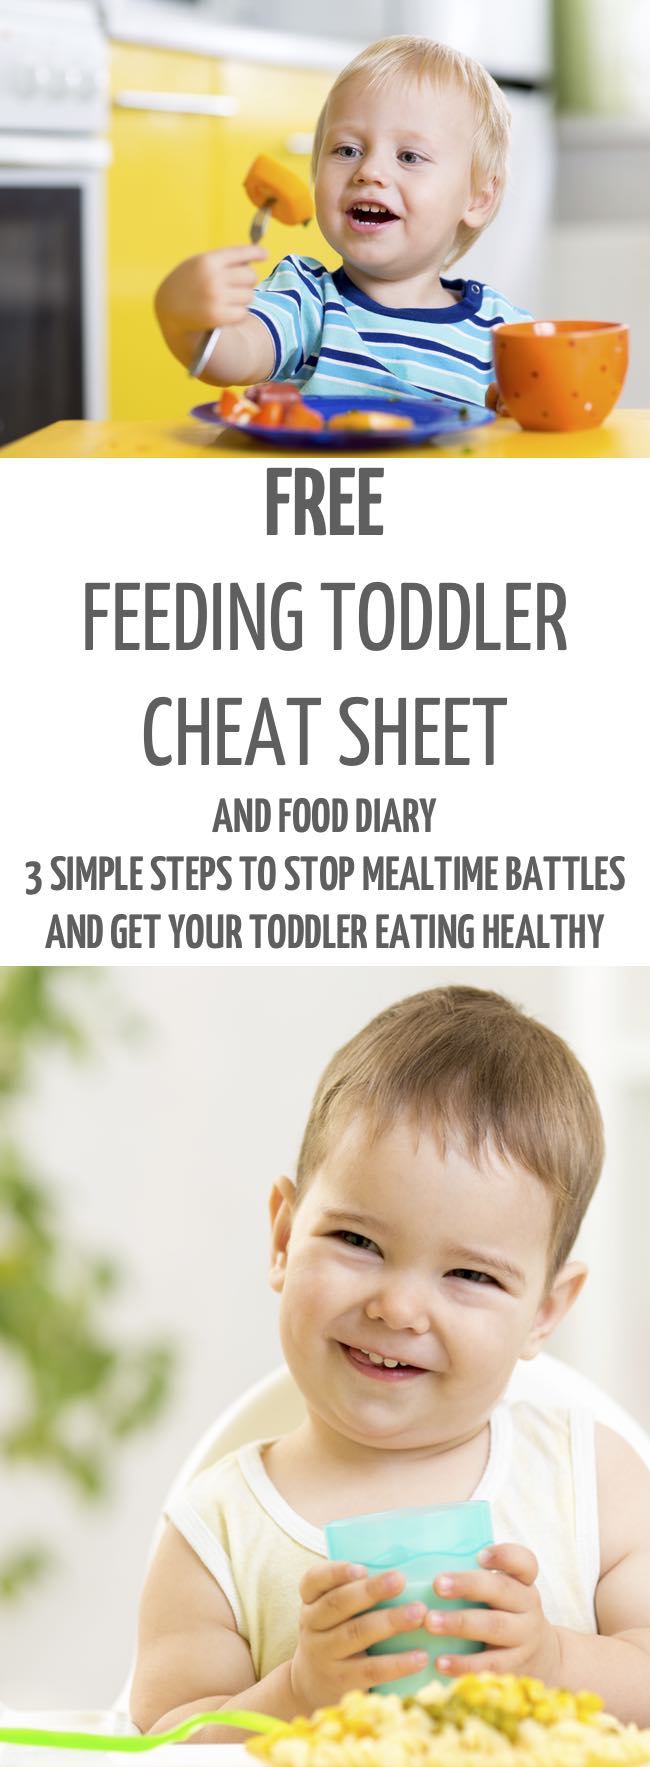 3 Simple steps to teach your fussy toddler to eat healthy. Even if your toddler won't eat anything, learn how to stop meal time battles and find the stress free way to teach them healthy eating habits. #toddler #fussyeater #fussytoddler #toddlerwon'teat #pickyeater #parenting #positiveparenting.. #toddler #fussyeater #fussytoddler #toddlerwon'teat #pickyeater #parenting #positiveparenting.